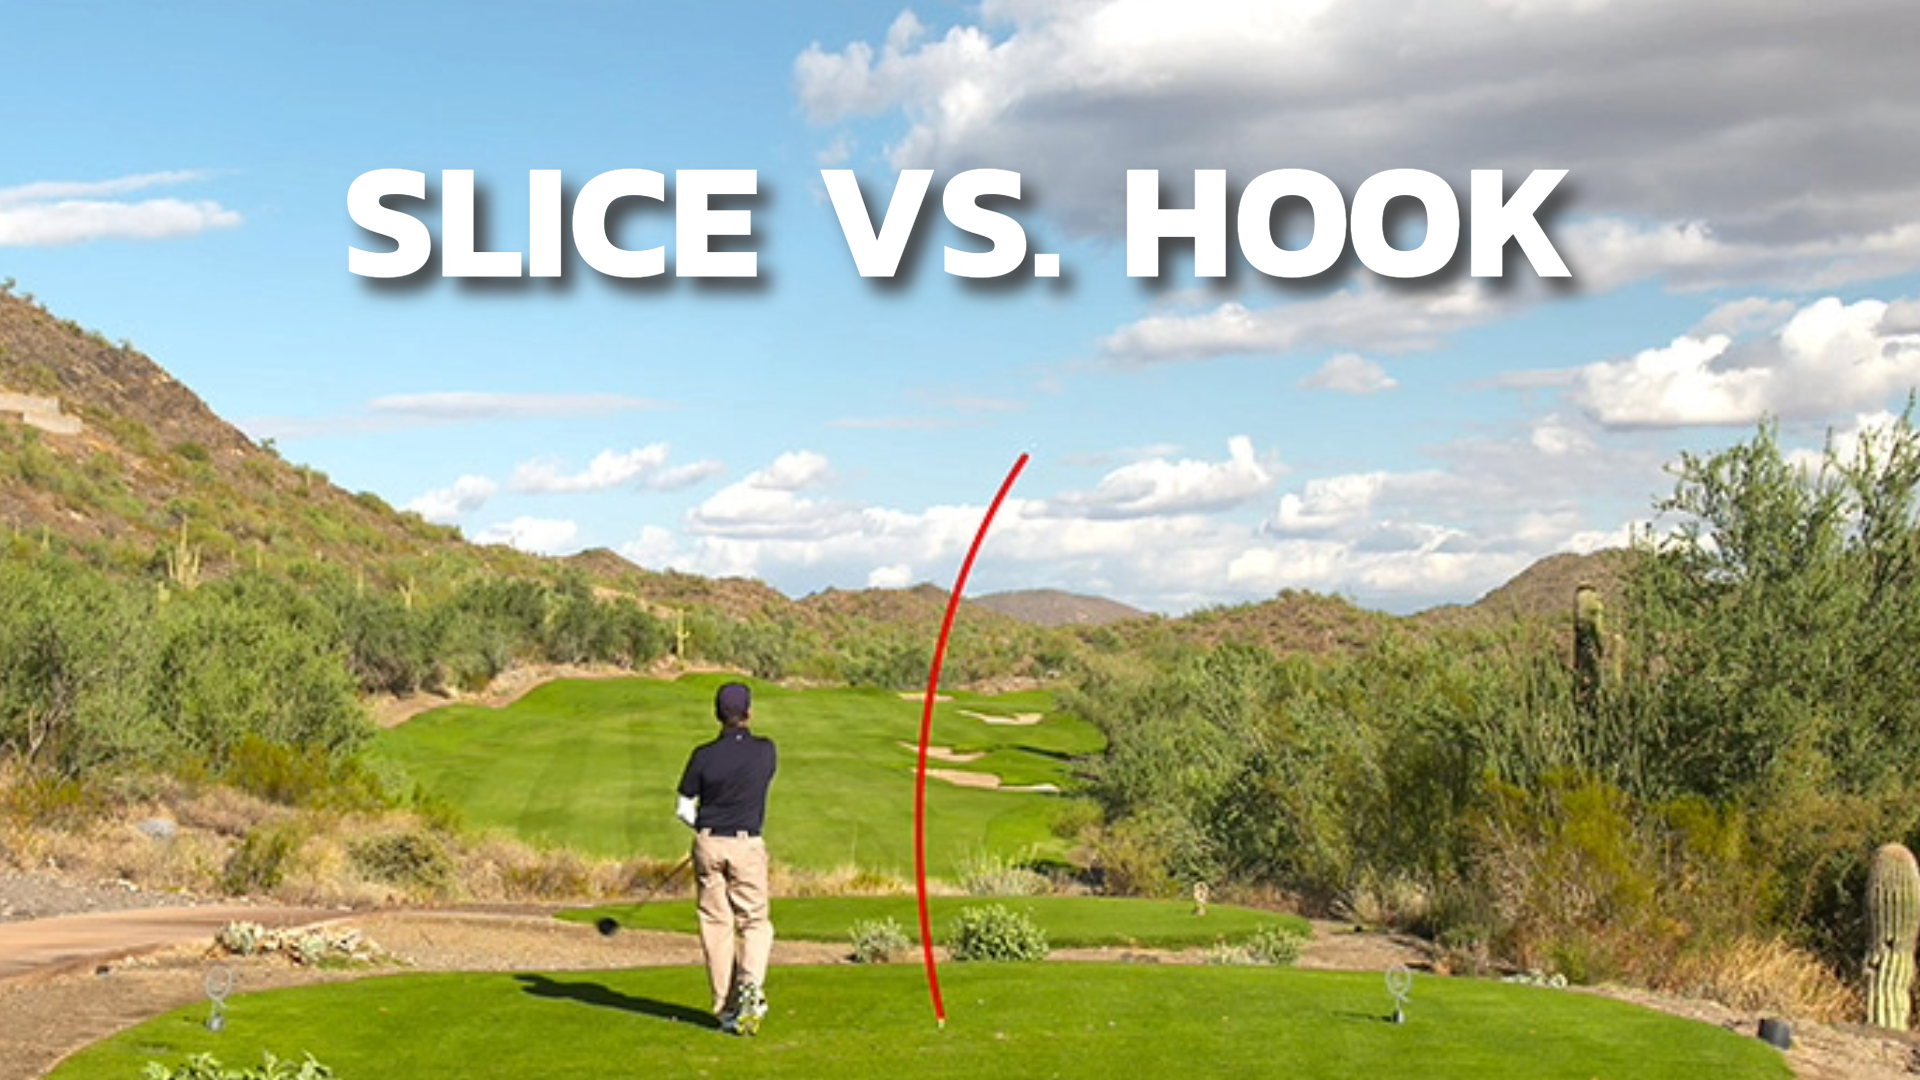 Slice versus hook shown with a red line curving to the right